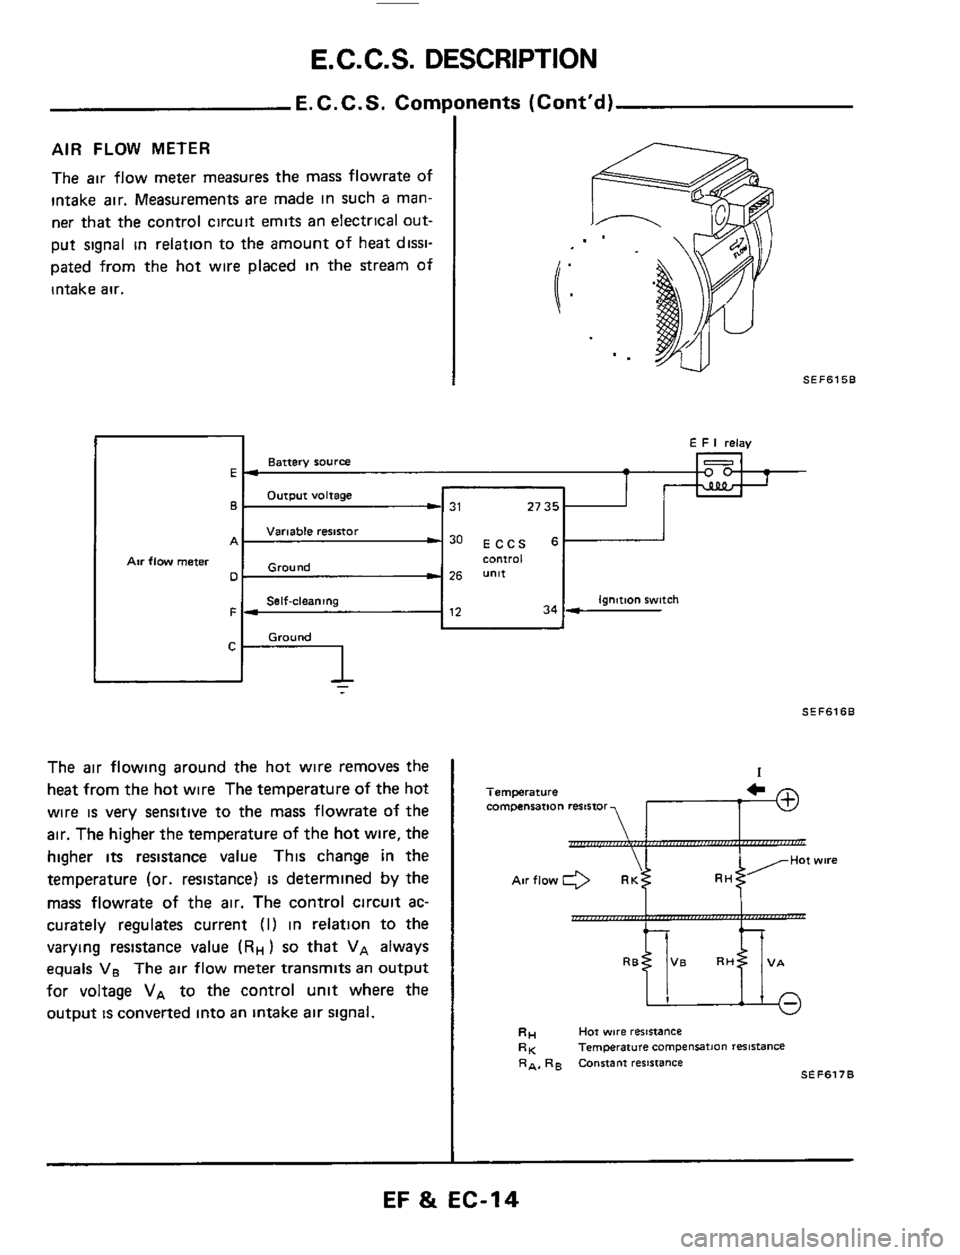 NISSAN 300ZX 1984 Z31 Engine Fuel And Emission Control System User Guide E.C.C.S. DESCRIPTION 
E.C.C.S. Components  (Contd) 
A 
Air flow meter 0. 
C 
AIR FLOW METER 
The air flow meter  measures  the mass  flowrate  of 
intake  air. Measurements  are made  in such 
a man-